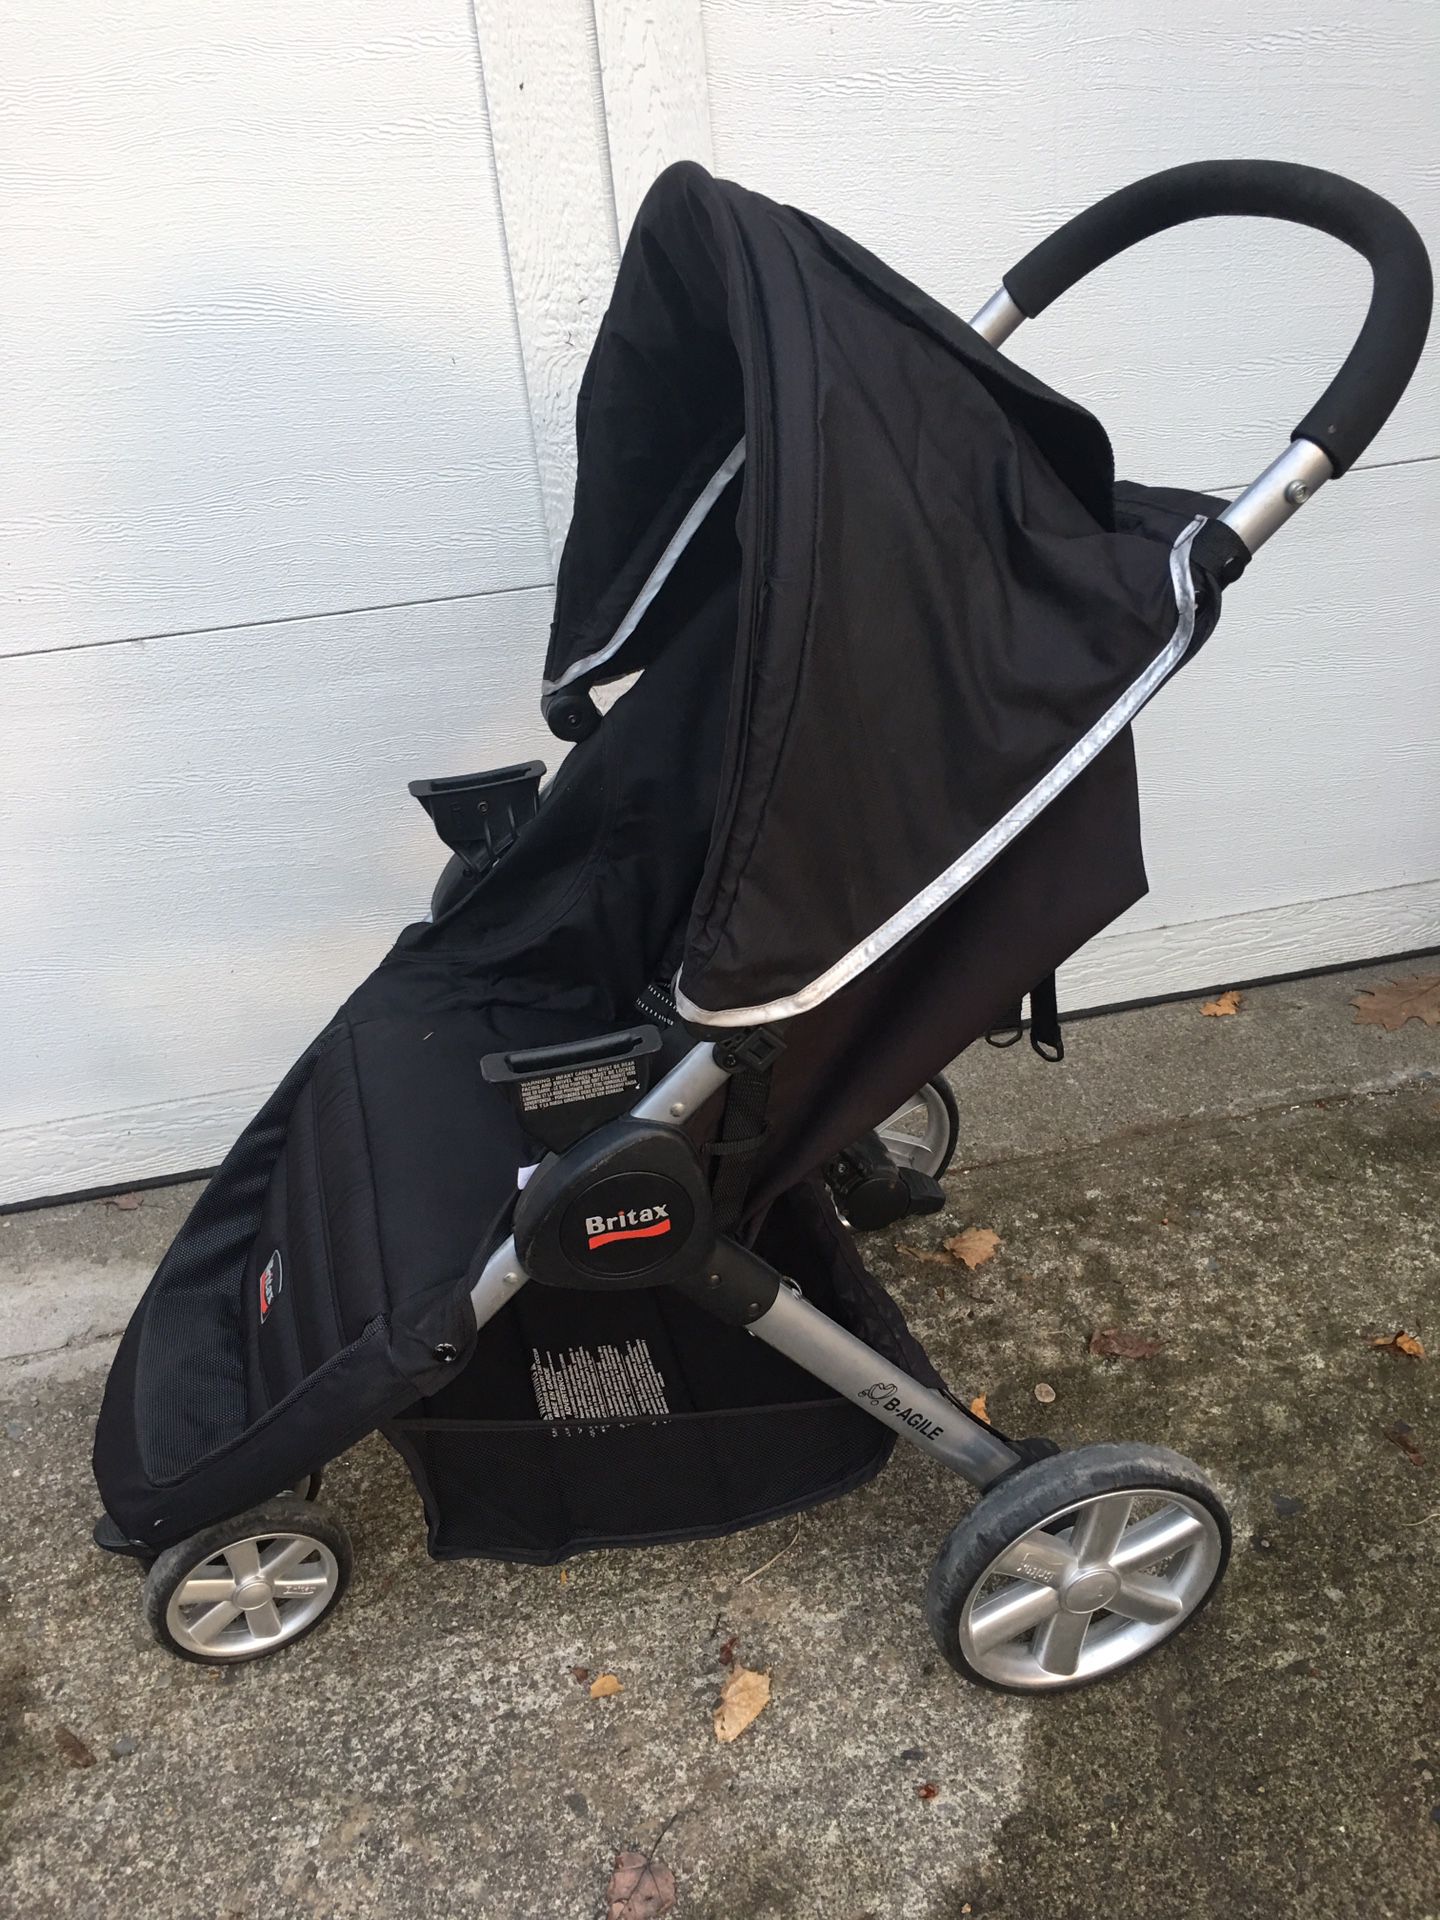 Britax Stroller foldable very popular model Excellent condition